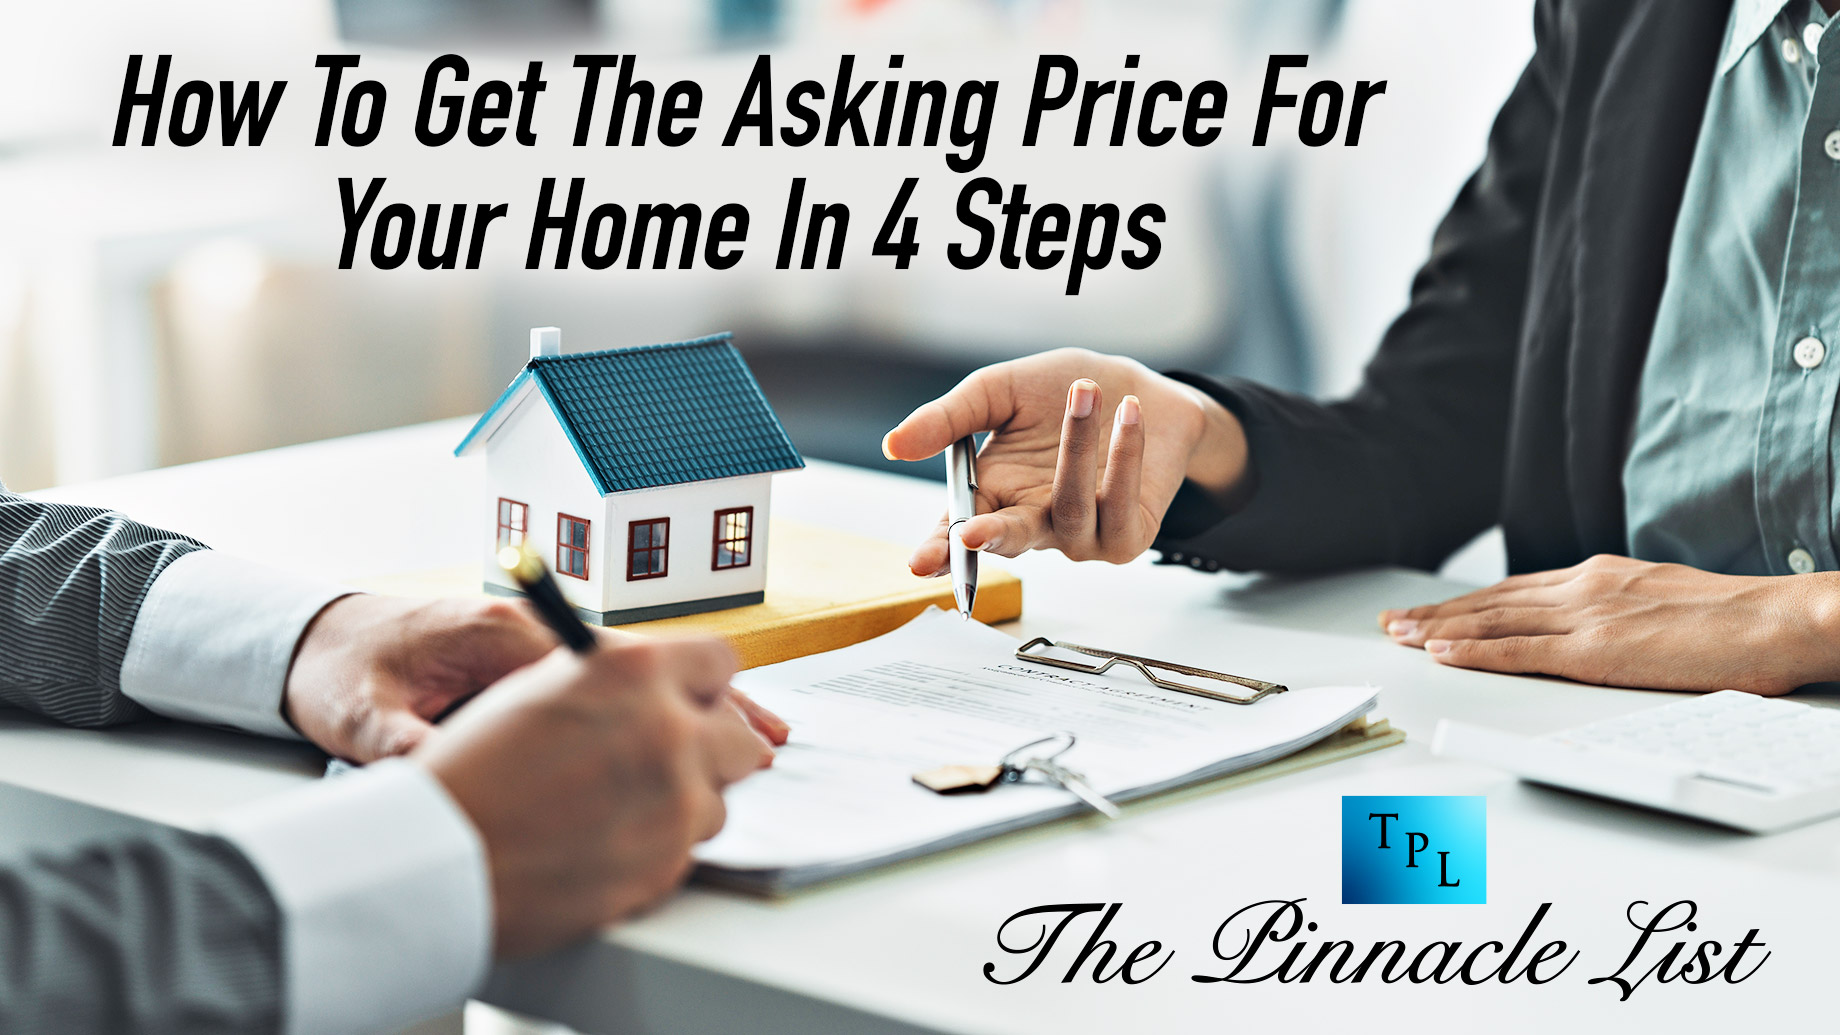 How To Get The Asking Price For Your Home In 4 Steps